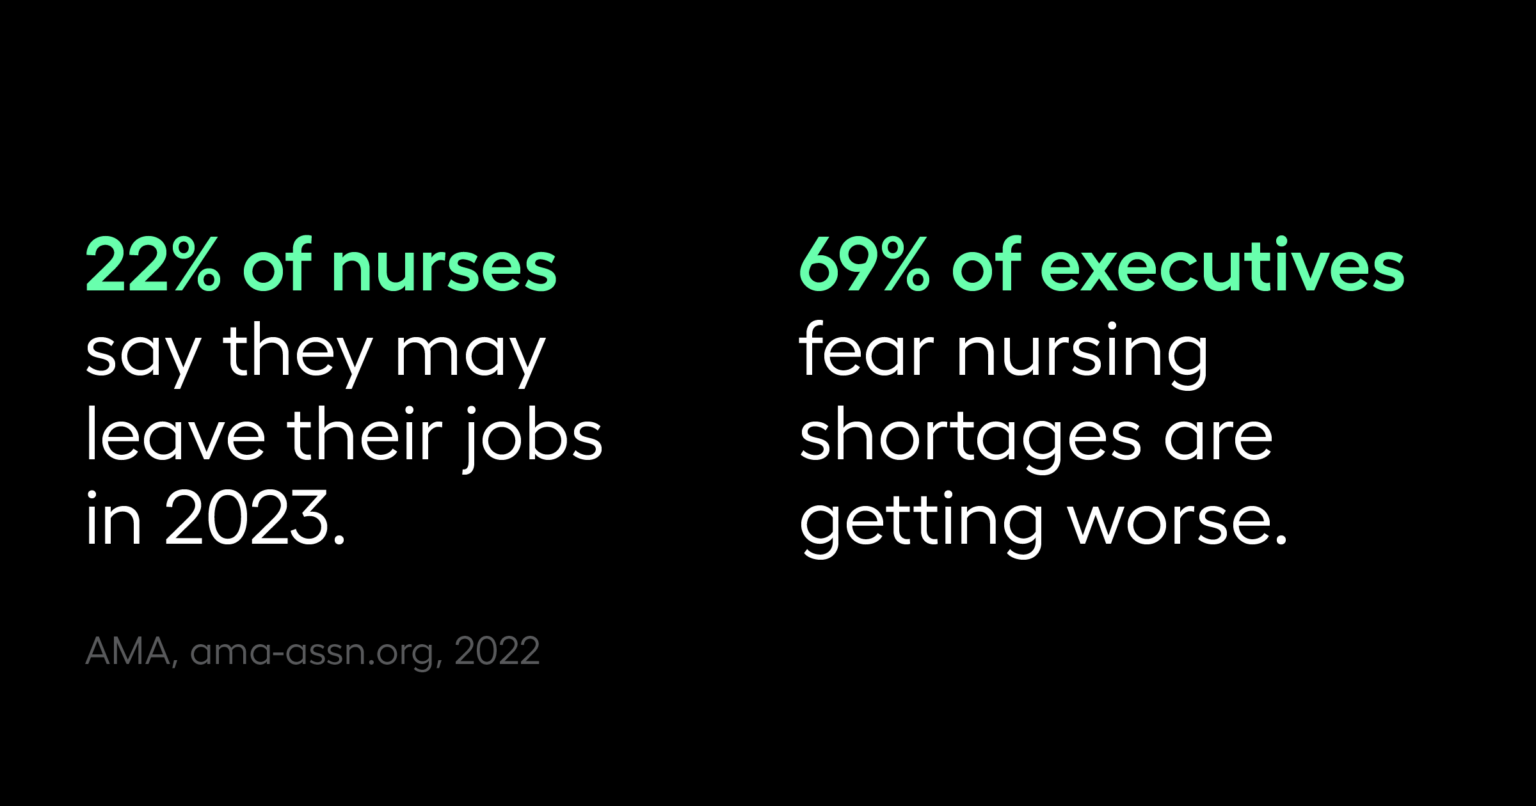 22% of nurses say they may leave their jobs in 2023. 69% of executives fear nursing shortages are getting worse.